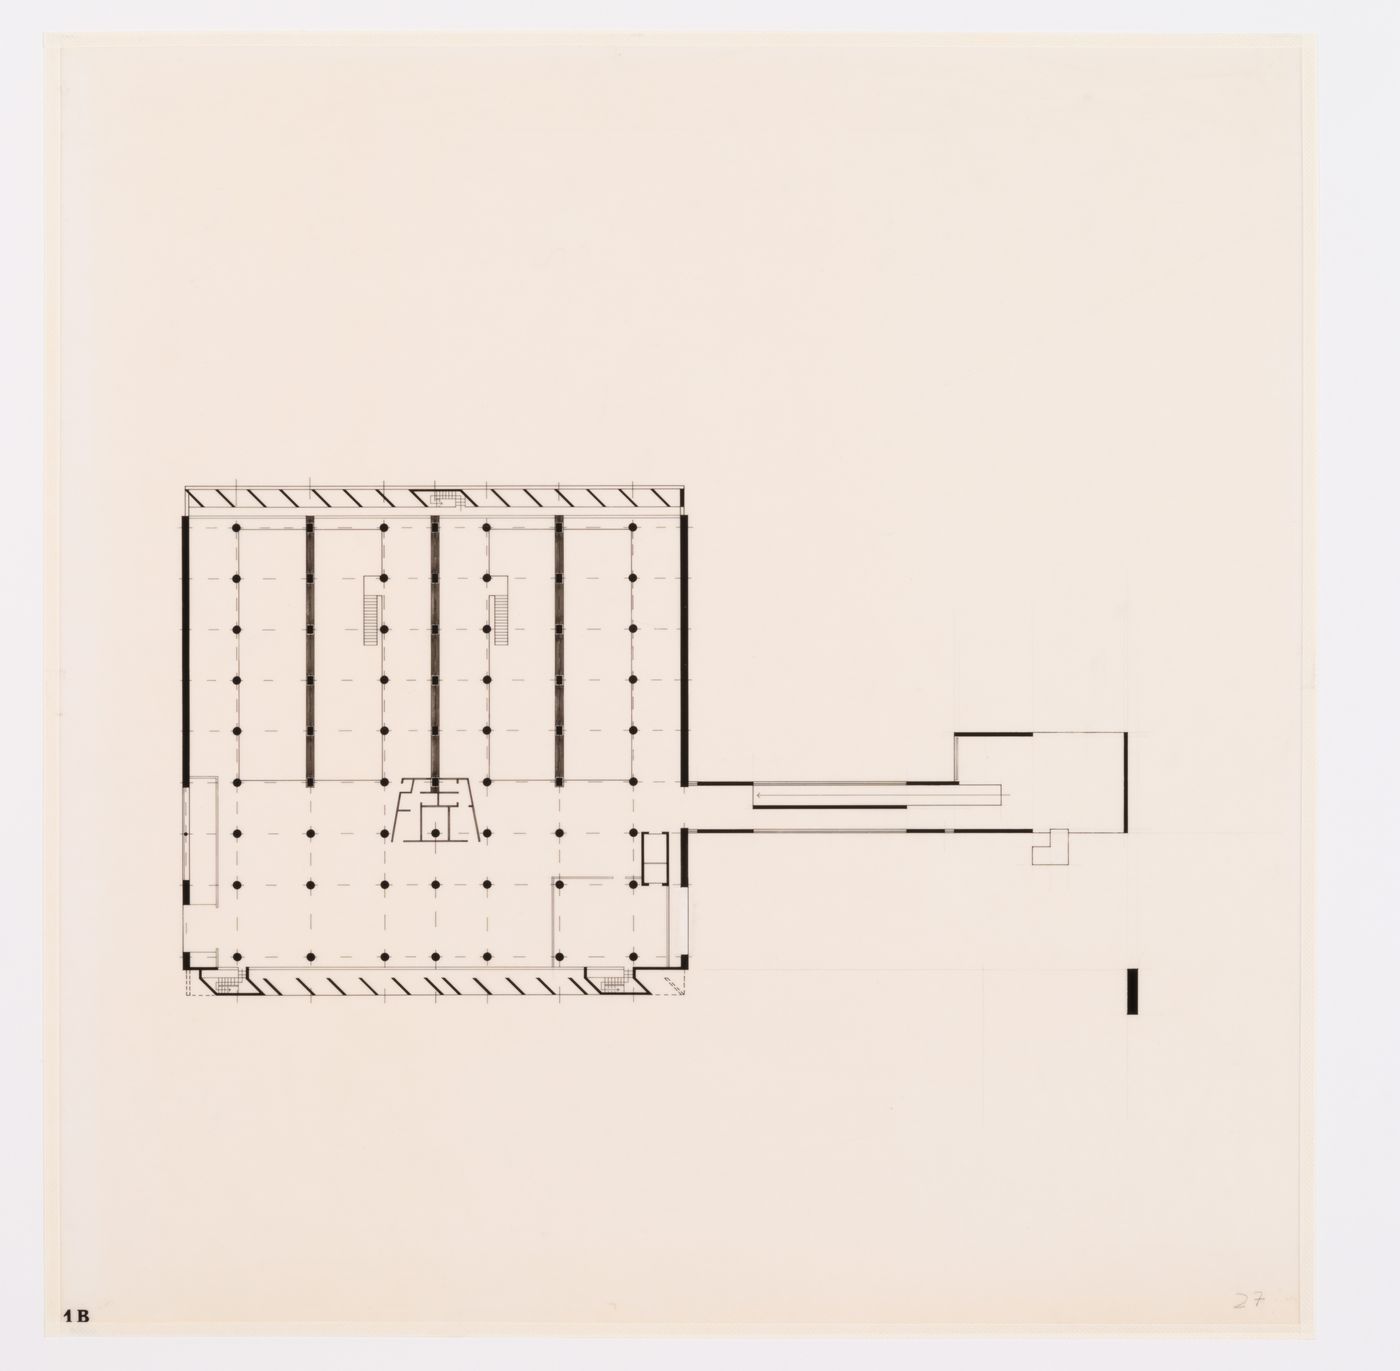 Presentation drawing for the Museum of Knowledge, Sector 1, Chandigarh, India